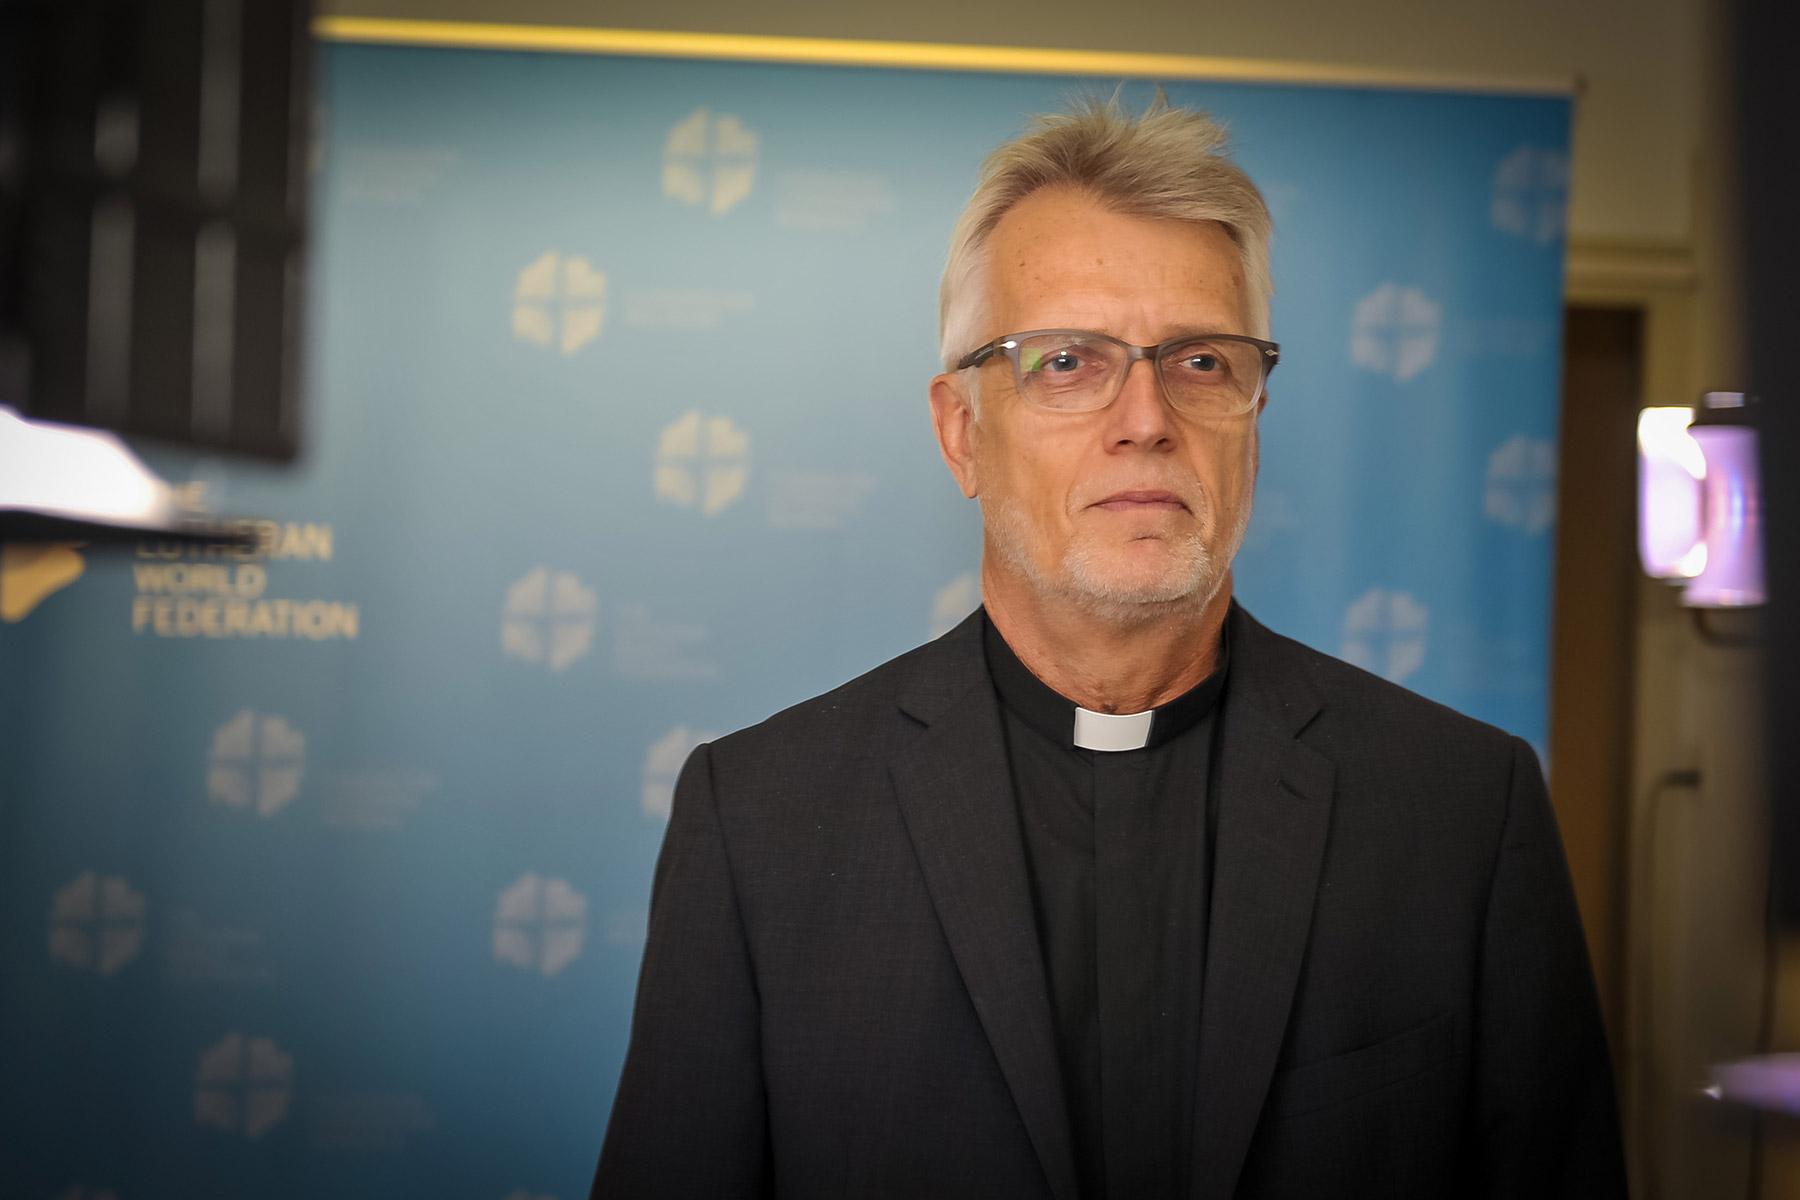 LWF General Secretary Martin Junge  addressed the Faith for Nature conference which is taking place in SkÃ¡lholt, Iceland, via video stream. Photo: LWF/S. Gallay